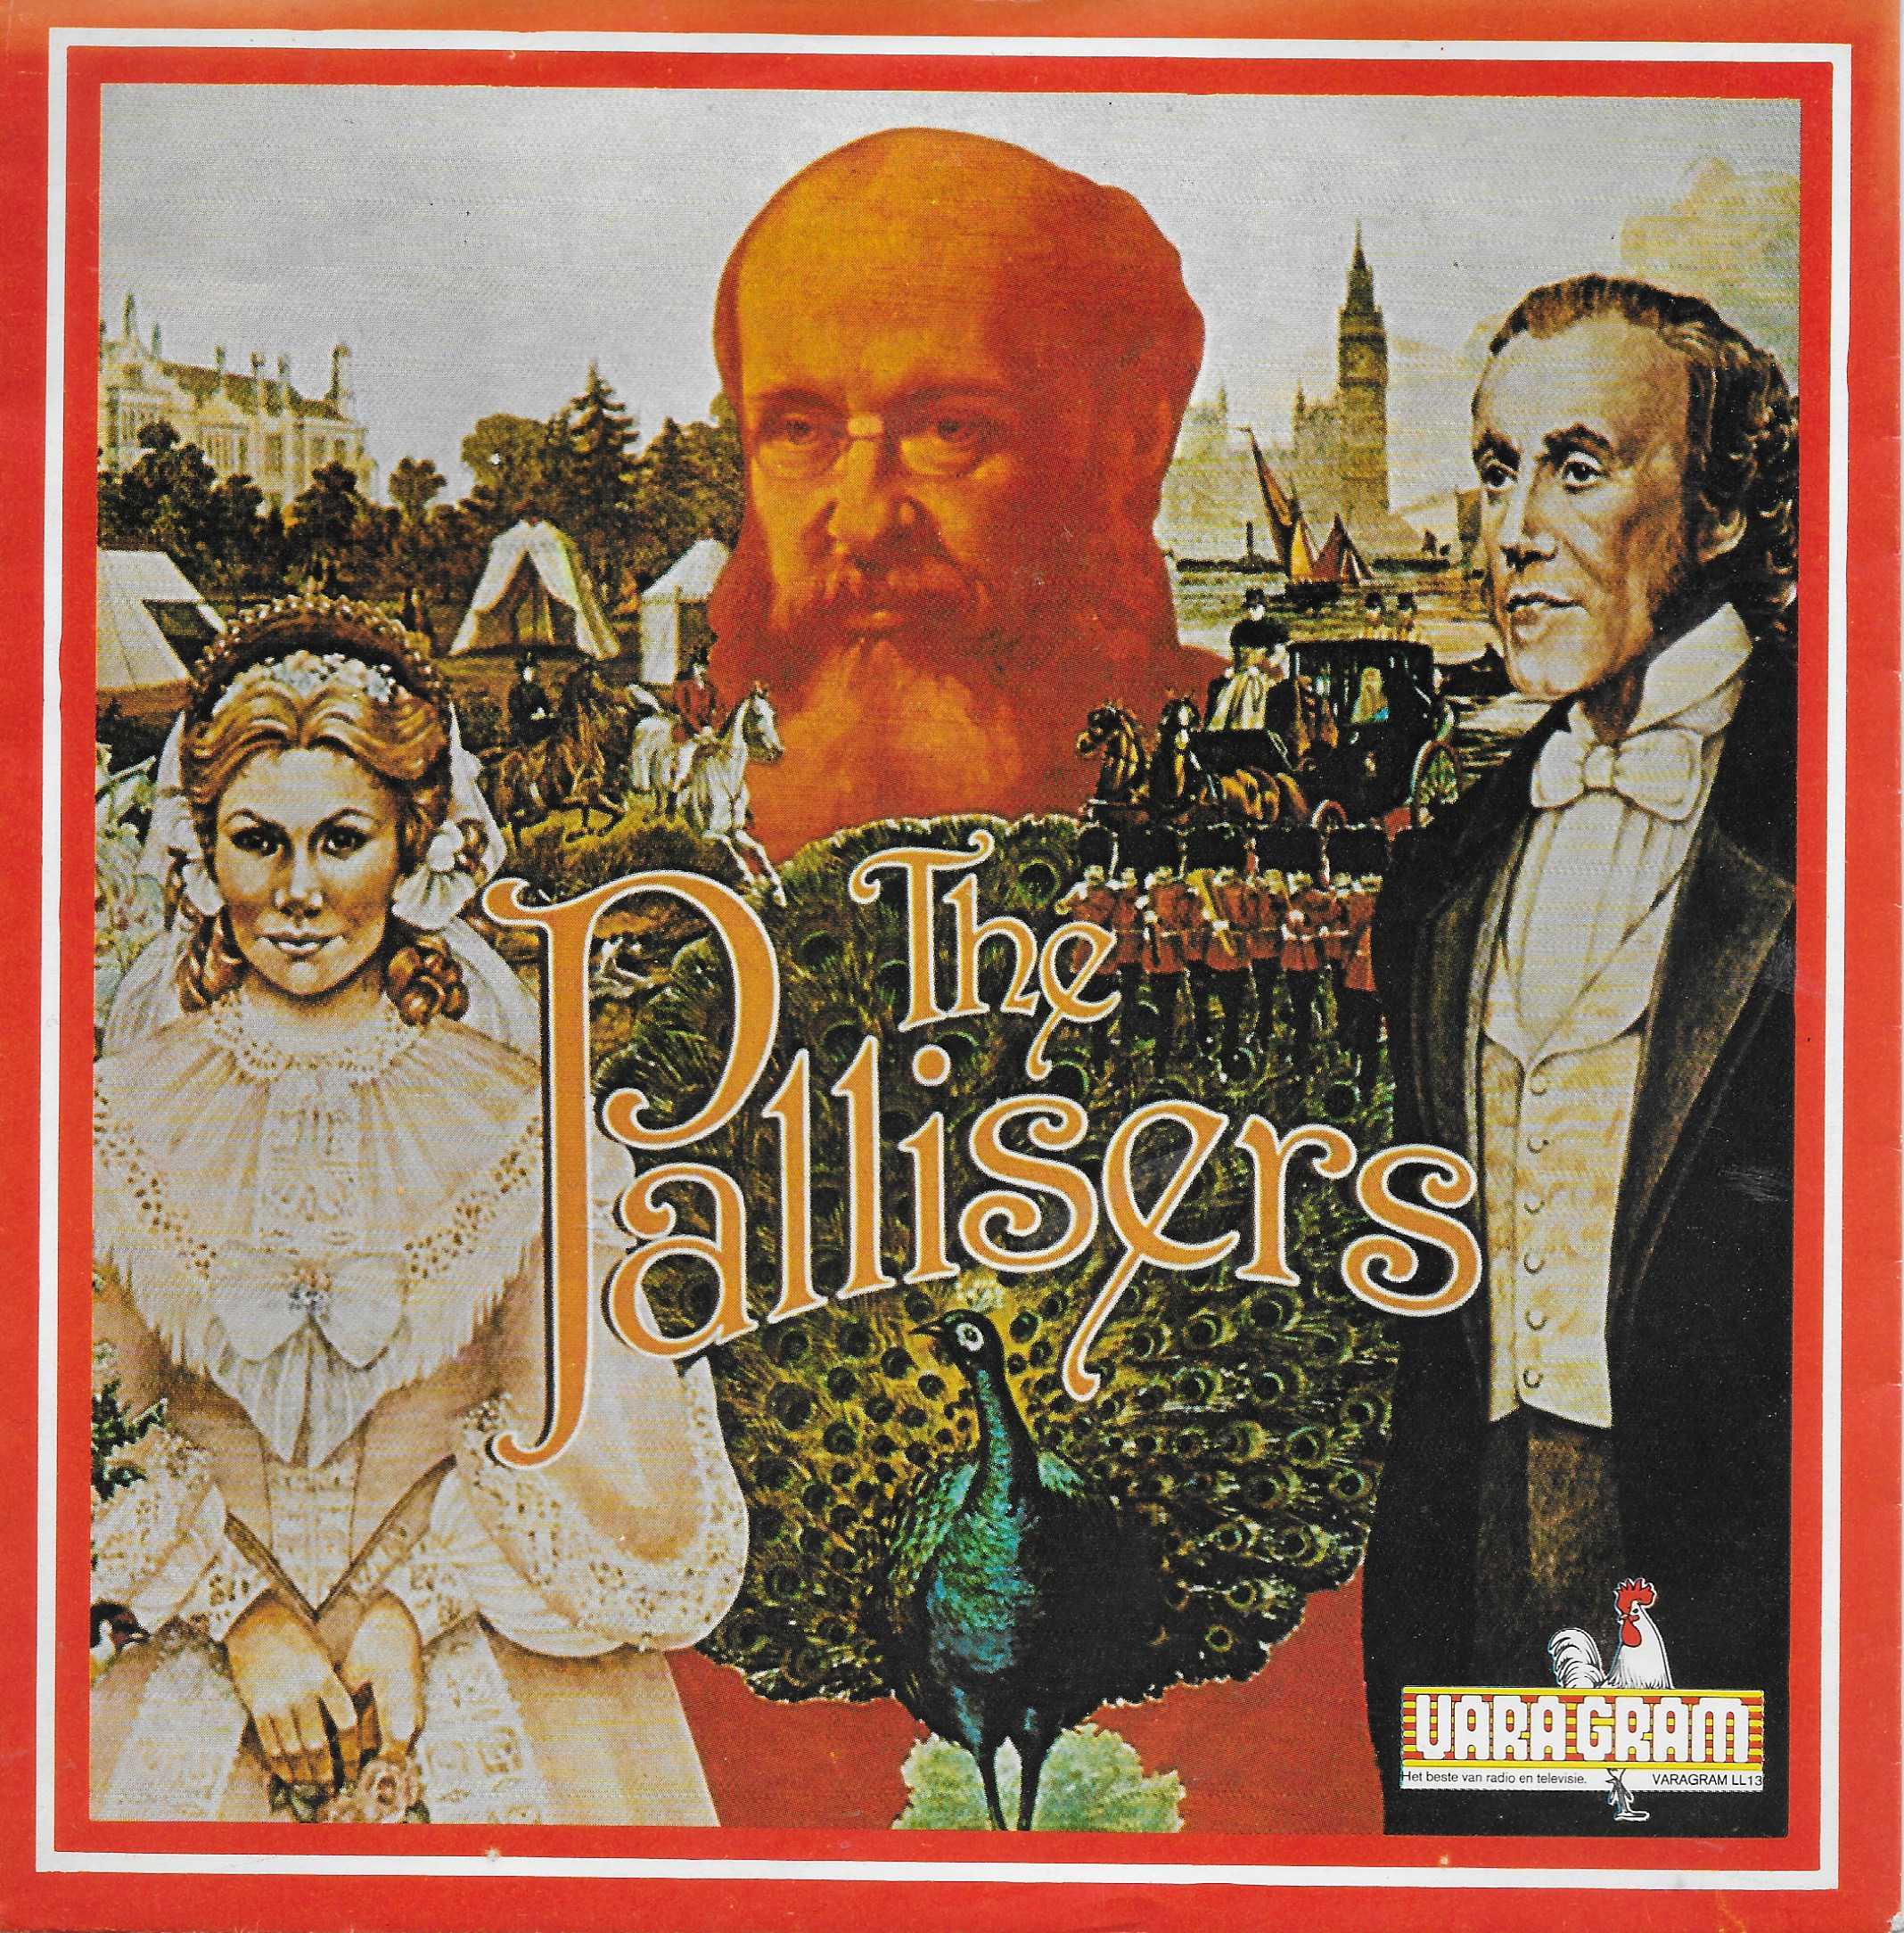 Picture of LL 13 The Pallisers (Dutch import) by artist Herbert Chappell from the BBC singles - Records and Tapes library